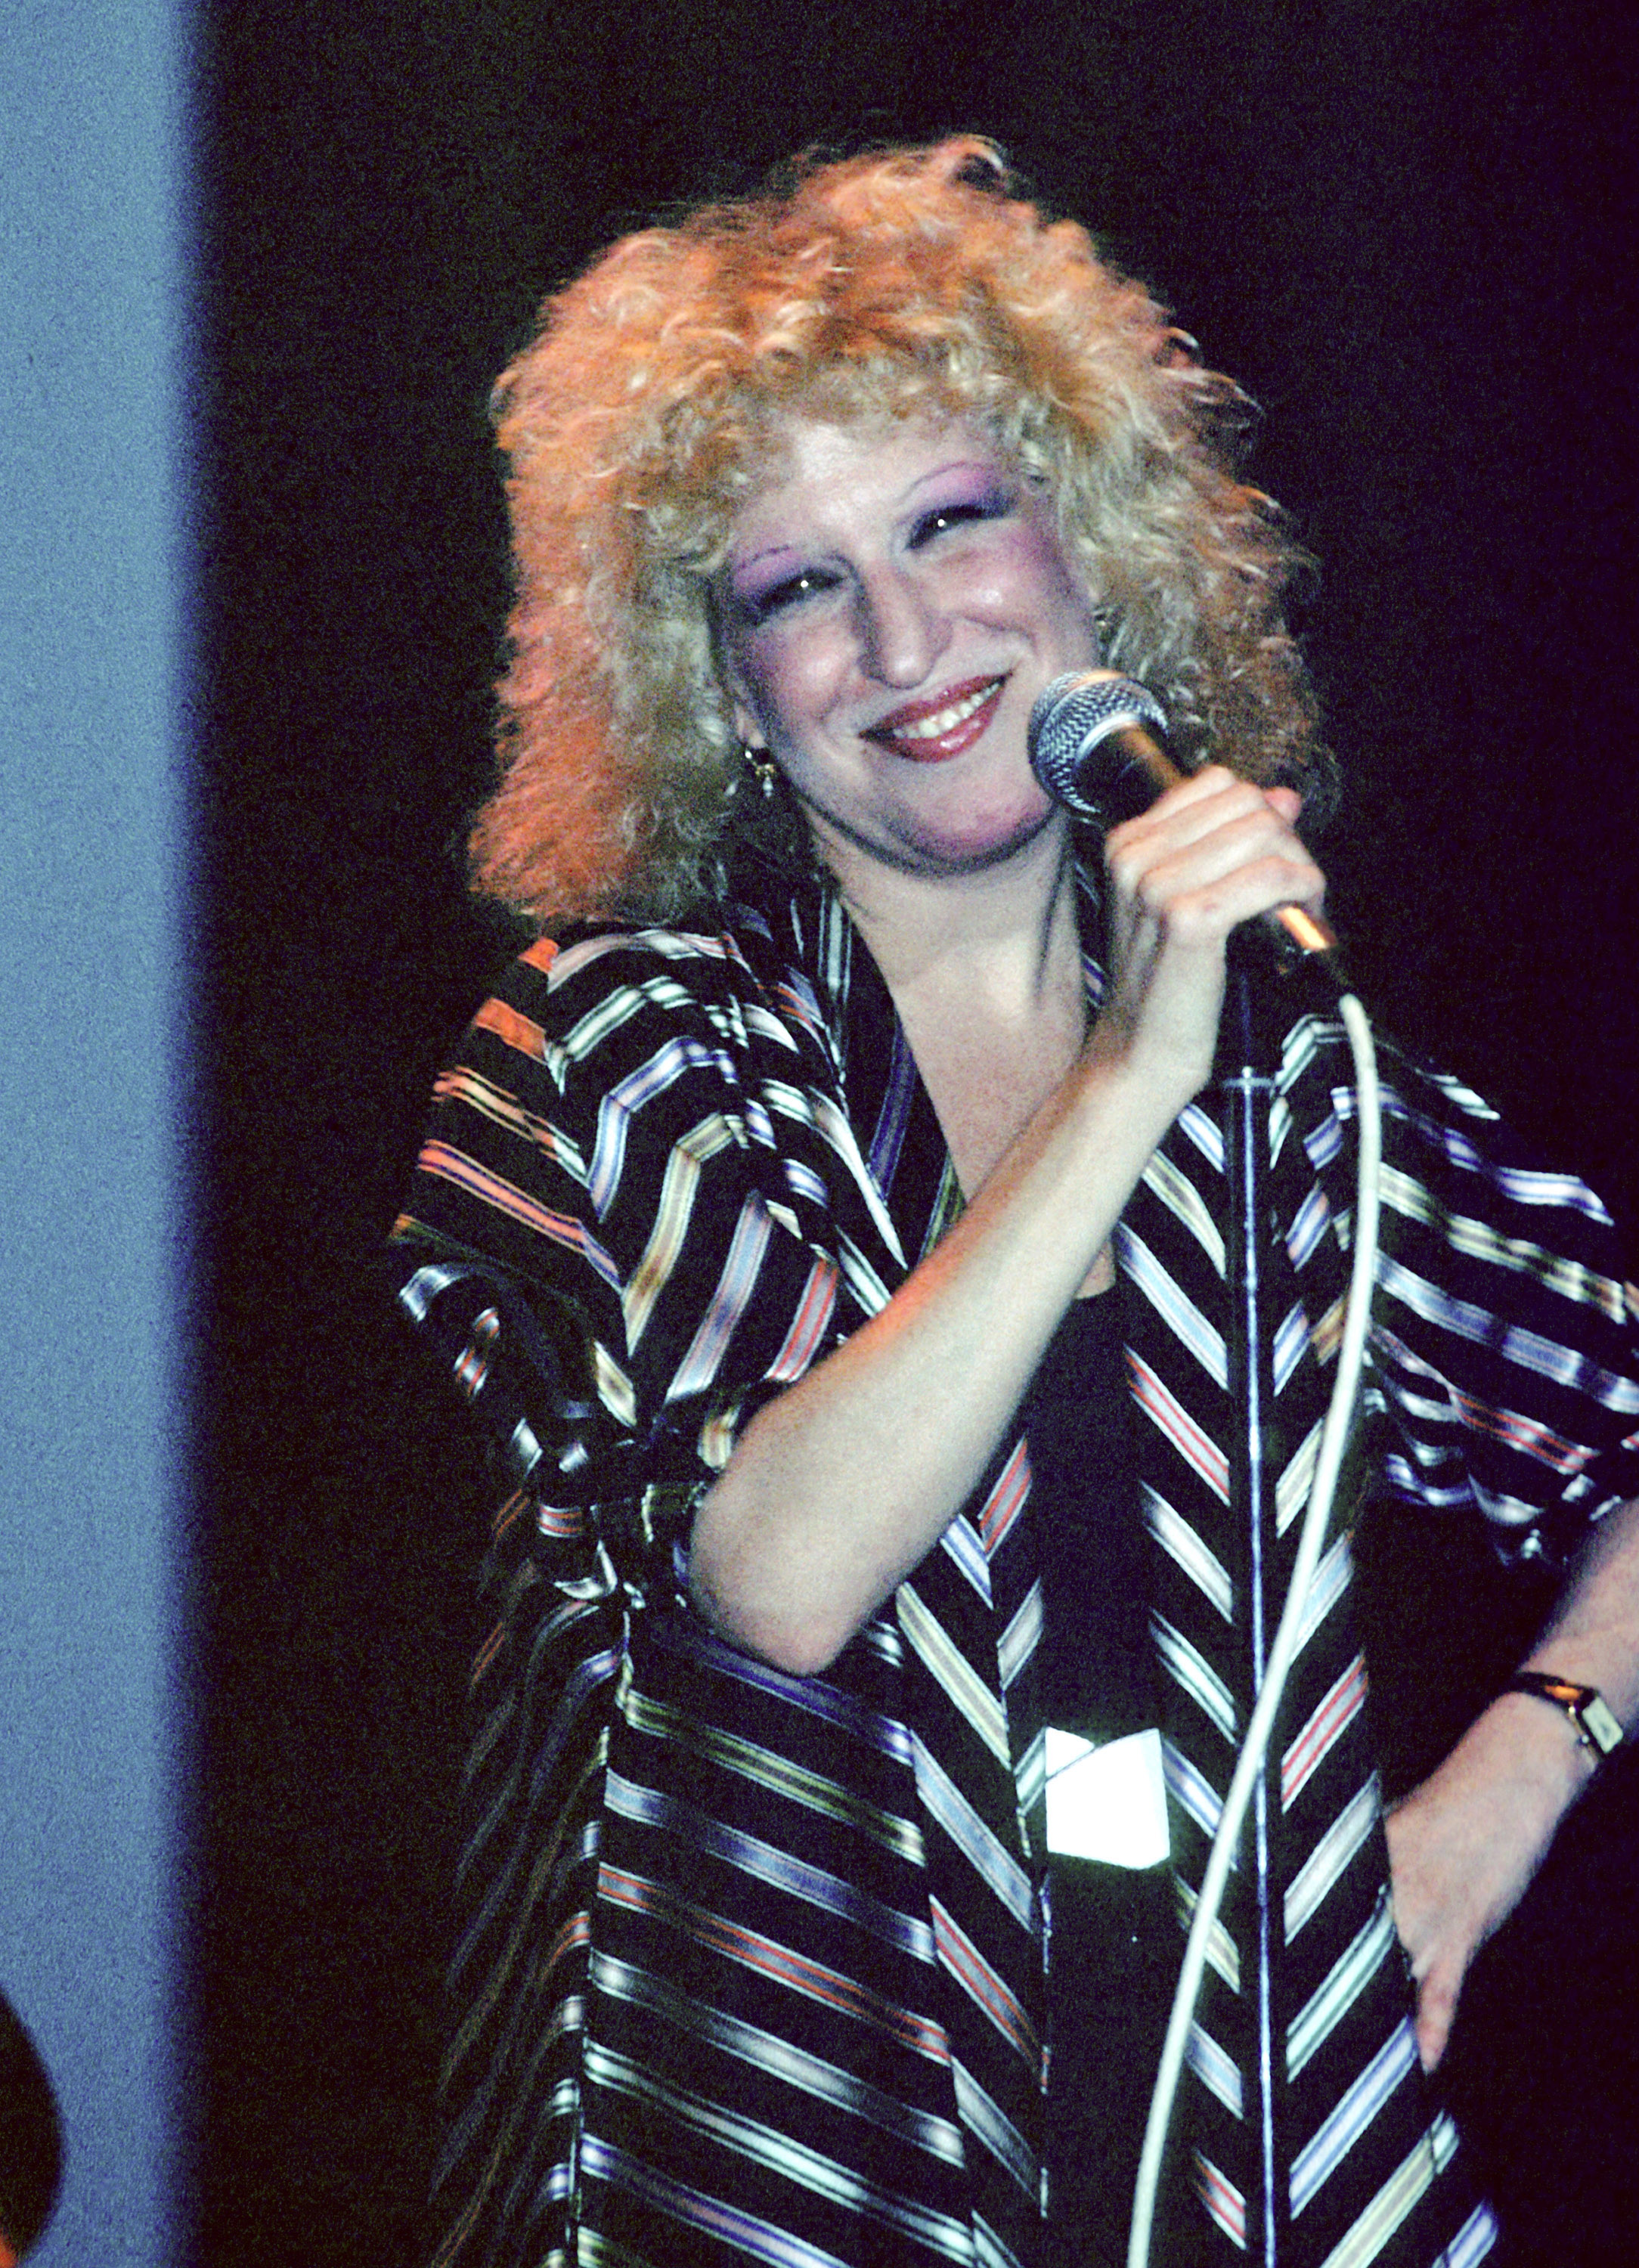 Bette Midler during "The Day of the Child" benefit for the children of Cambodia on June 1, 1980 in New York City | Source: Getty Images